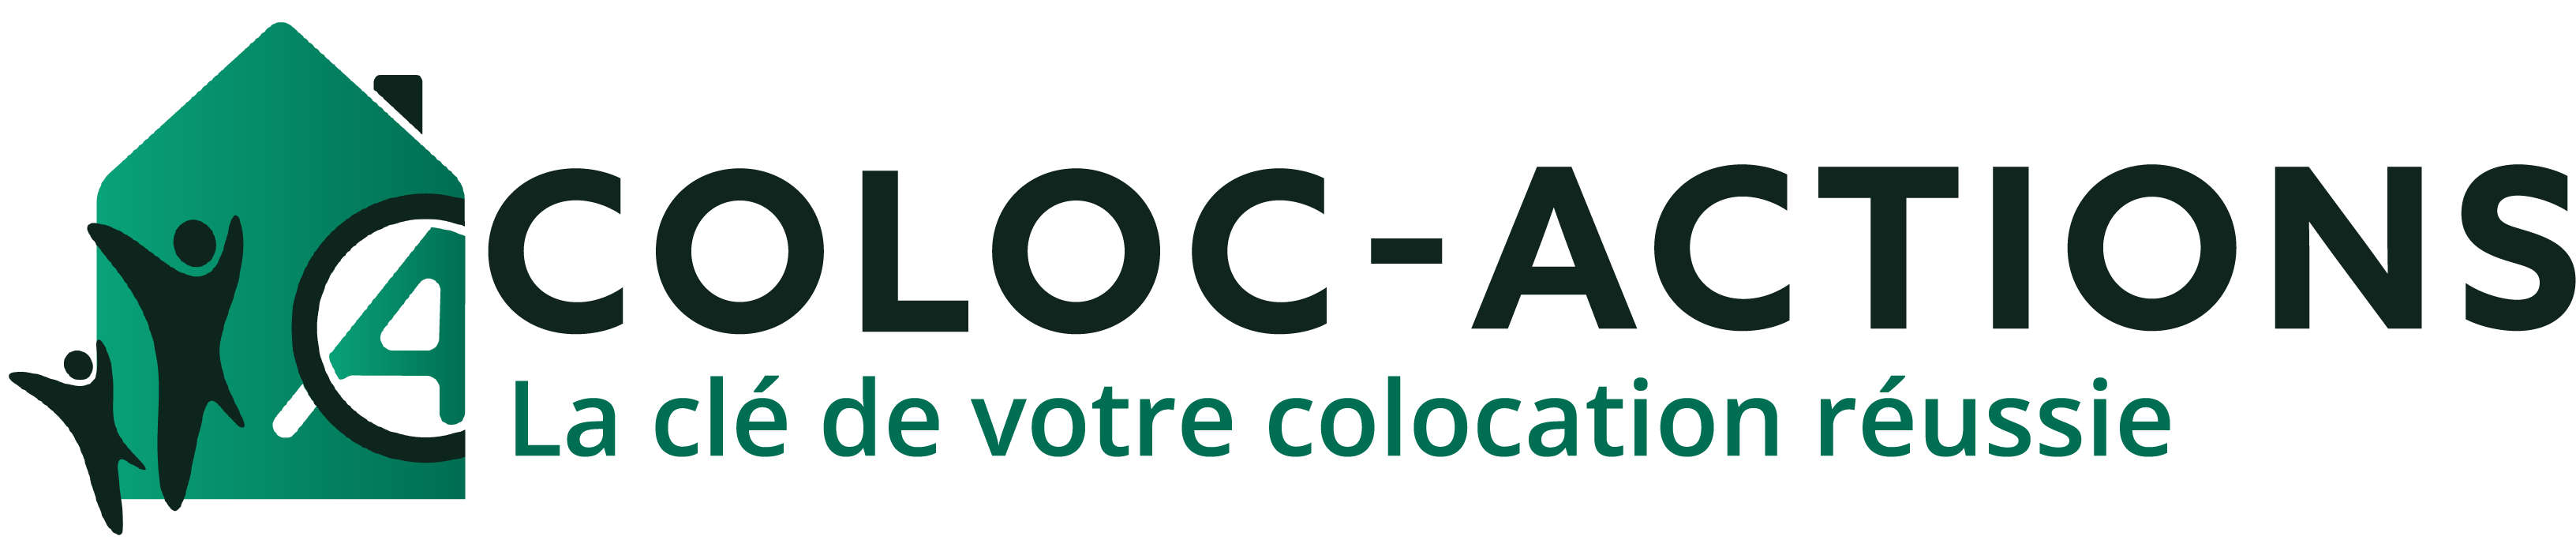 Coloc Actions